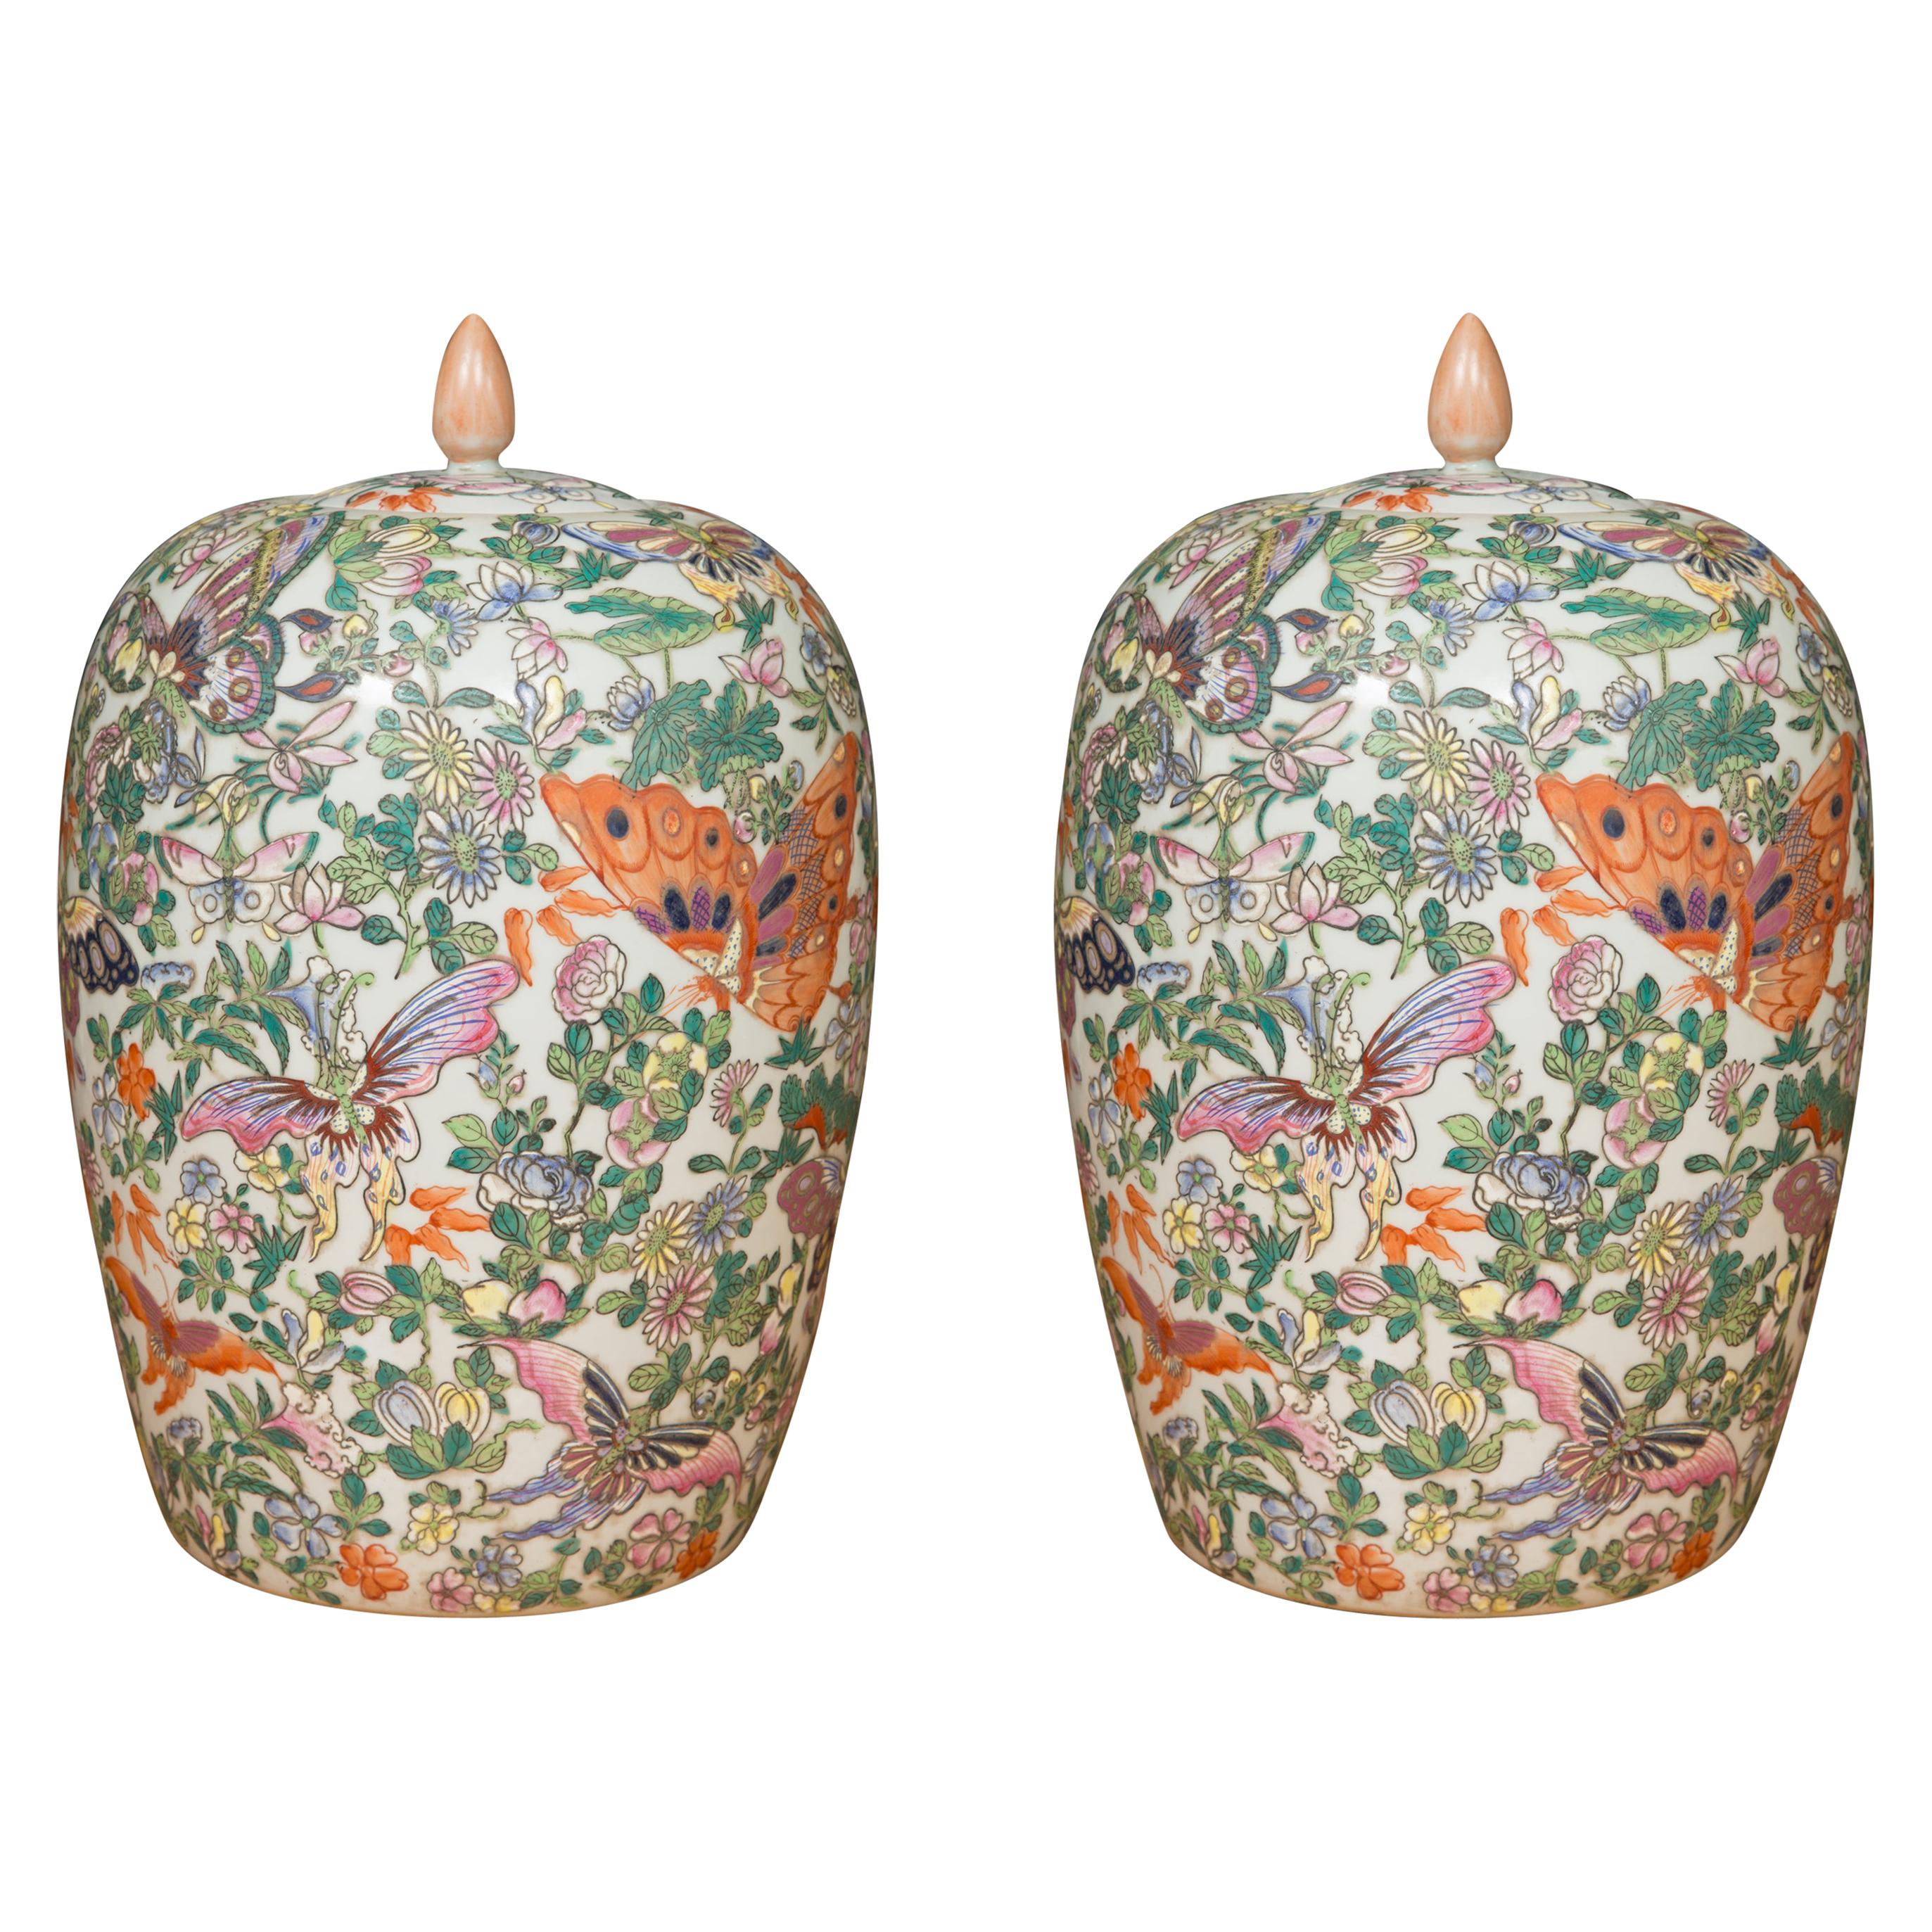 Pair of Lidded Melon Shaped Chinese Export Butterfly Pattern Jars